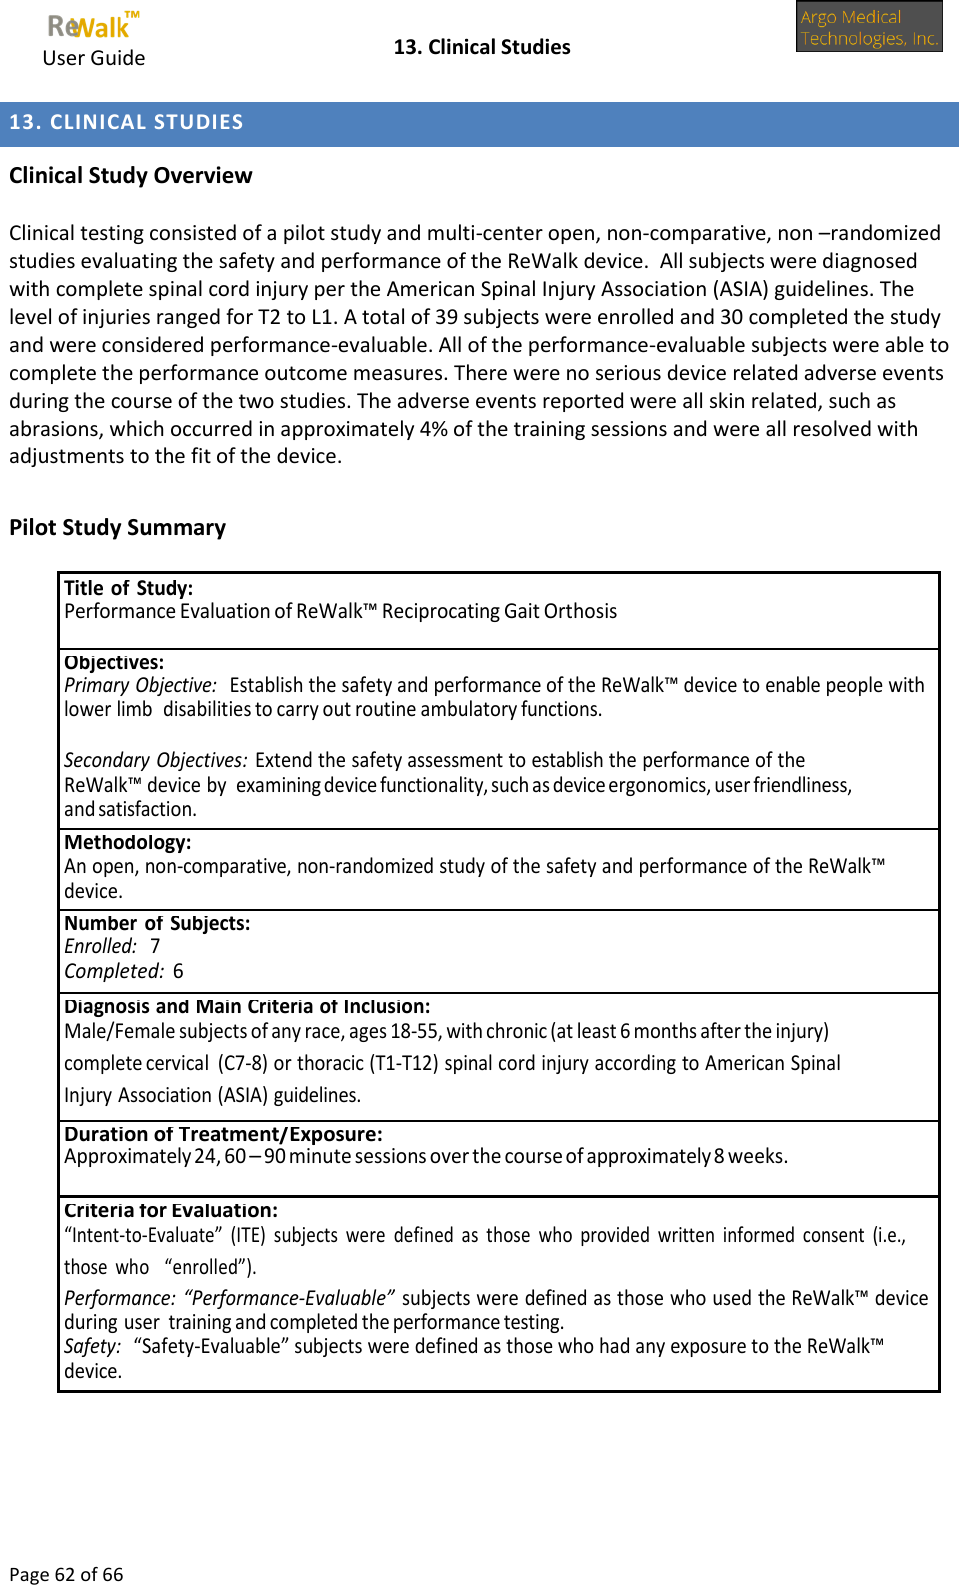     User Guide    13. Clinical Studies  Page 62 of 66  13. CLINICAL STUDIES  Clinical Study Overview  Clinical testing consisted of a pilot study and multi-center open, non-comparative, non –randomized studies evaluating the safety and performance of the ReWalk device.  All subjects were diagnosed with complete spinal cord injury per the American Spinal Injury Association (ASIA) guidelines. The level of injuries ranged for T2 to L1. A total of 39 subjects were enrolled and 30 completed the study and were considered performance-evaluable. All of the performance-evaluable subjects were able to complete the performance outcome measures. There were no serious device related adverse events during the course of the two studies. The adverse events reported were all skin related, such as abrasions, which occurred in approximately 4% of the training sessions and were all resolved with adjustments to the fit of the device.   Pilot Study Summary   Title of Study: Performance Evaluation of ReWalk™ Reciprocating Gait Orthosis Objectives: Primary Objective:   Establish the safety and performance of the ReWalk™ device to enable people with lower limb disabilities to carry out routine ambulatory functions.  Secondary Objectives: Extend the safety assessment to establish the performance of the ReWalk™ device by examining device functionality, such as device ergonomics, user friendliness, and satisfaction. Methodology: An open, non-comparative, non-randomized study of the safety and performance of the ReWalk™ device. Number of Subjects: Enrolled:   7 Completed:  6 Diagnosis and Main Criteria of Inclusion: Male/Female subjects of any race, ages 18-55, with chronic (at least 6 months after the injury) complete cervical (C7-8) or thoracic (T1-T12) spinal cord injury according to American Spinal Injury Association (ASIA) guidelines. Duration of Treatment/Exposure: Approximately 24, 60 – 90 minute sessions over the course of approximately 8 weeks. Criteria for Evaluation: “Intent-to-Evaluate”  (ITE)  subjects  were  defined  as  those  who  provided  written  informed  consent  (i.e., those  who “enrolled”). Performance: “Performance-Evaluable” subjects were defined as those who used the ReWalk™ device during user training and completed the performance testing. Safety:   “Safety-Evaluable” subjects were defined as those who had any exposure to the ReWalk™ device. 